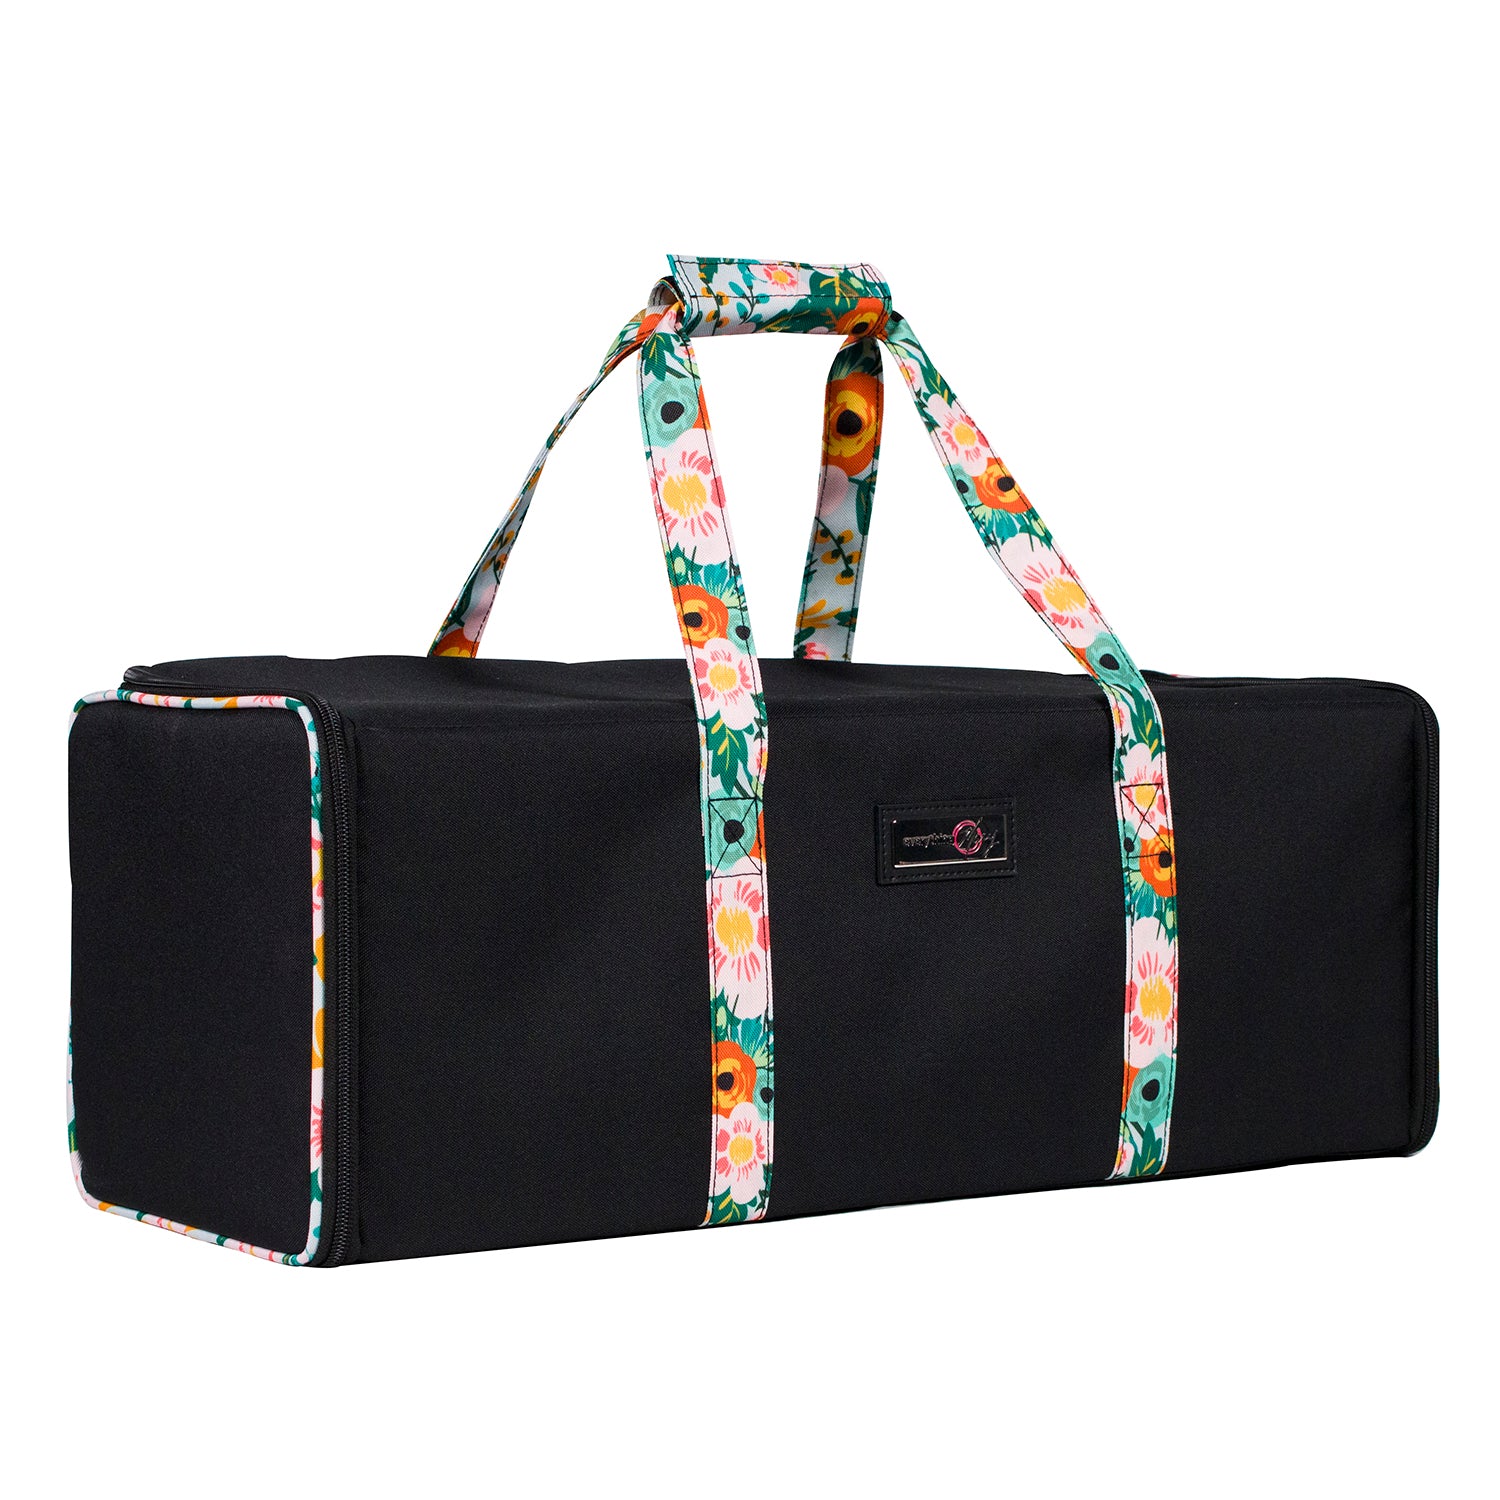 IMAGINING IMAgININg carrying case Bag compatible with cricut Maker